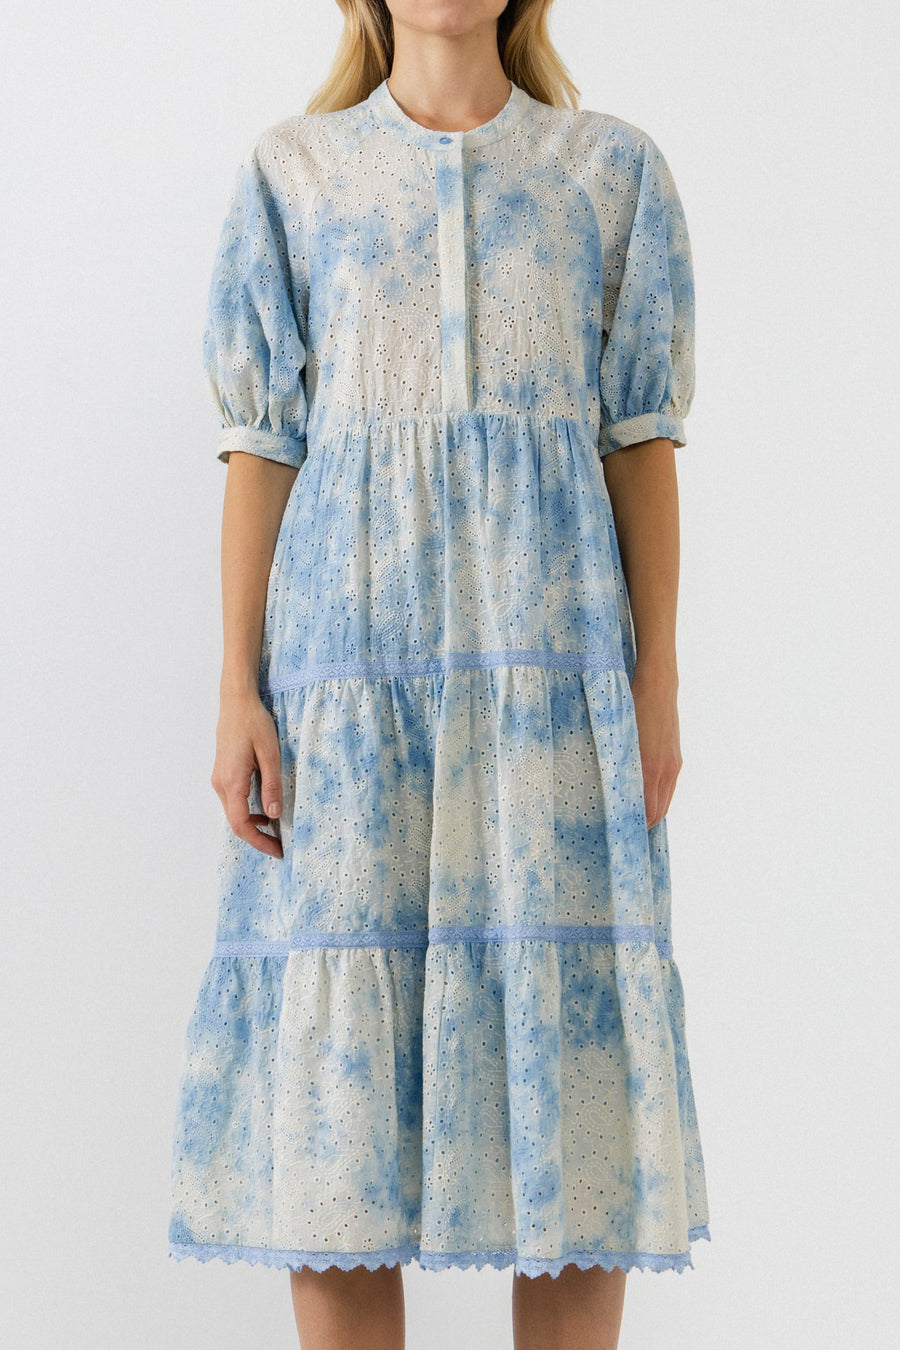 FREE THE ROSES-Paisely Eyelet Midi Dress with Tie-dye Effect-DRESSES available at Objectrare